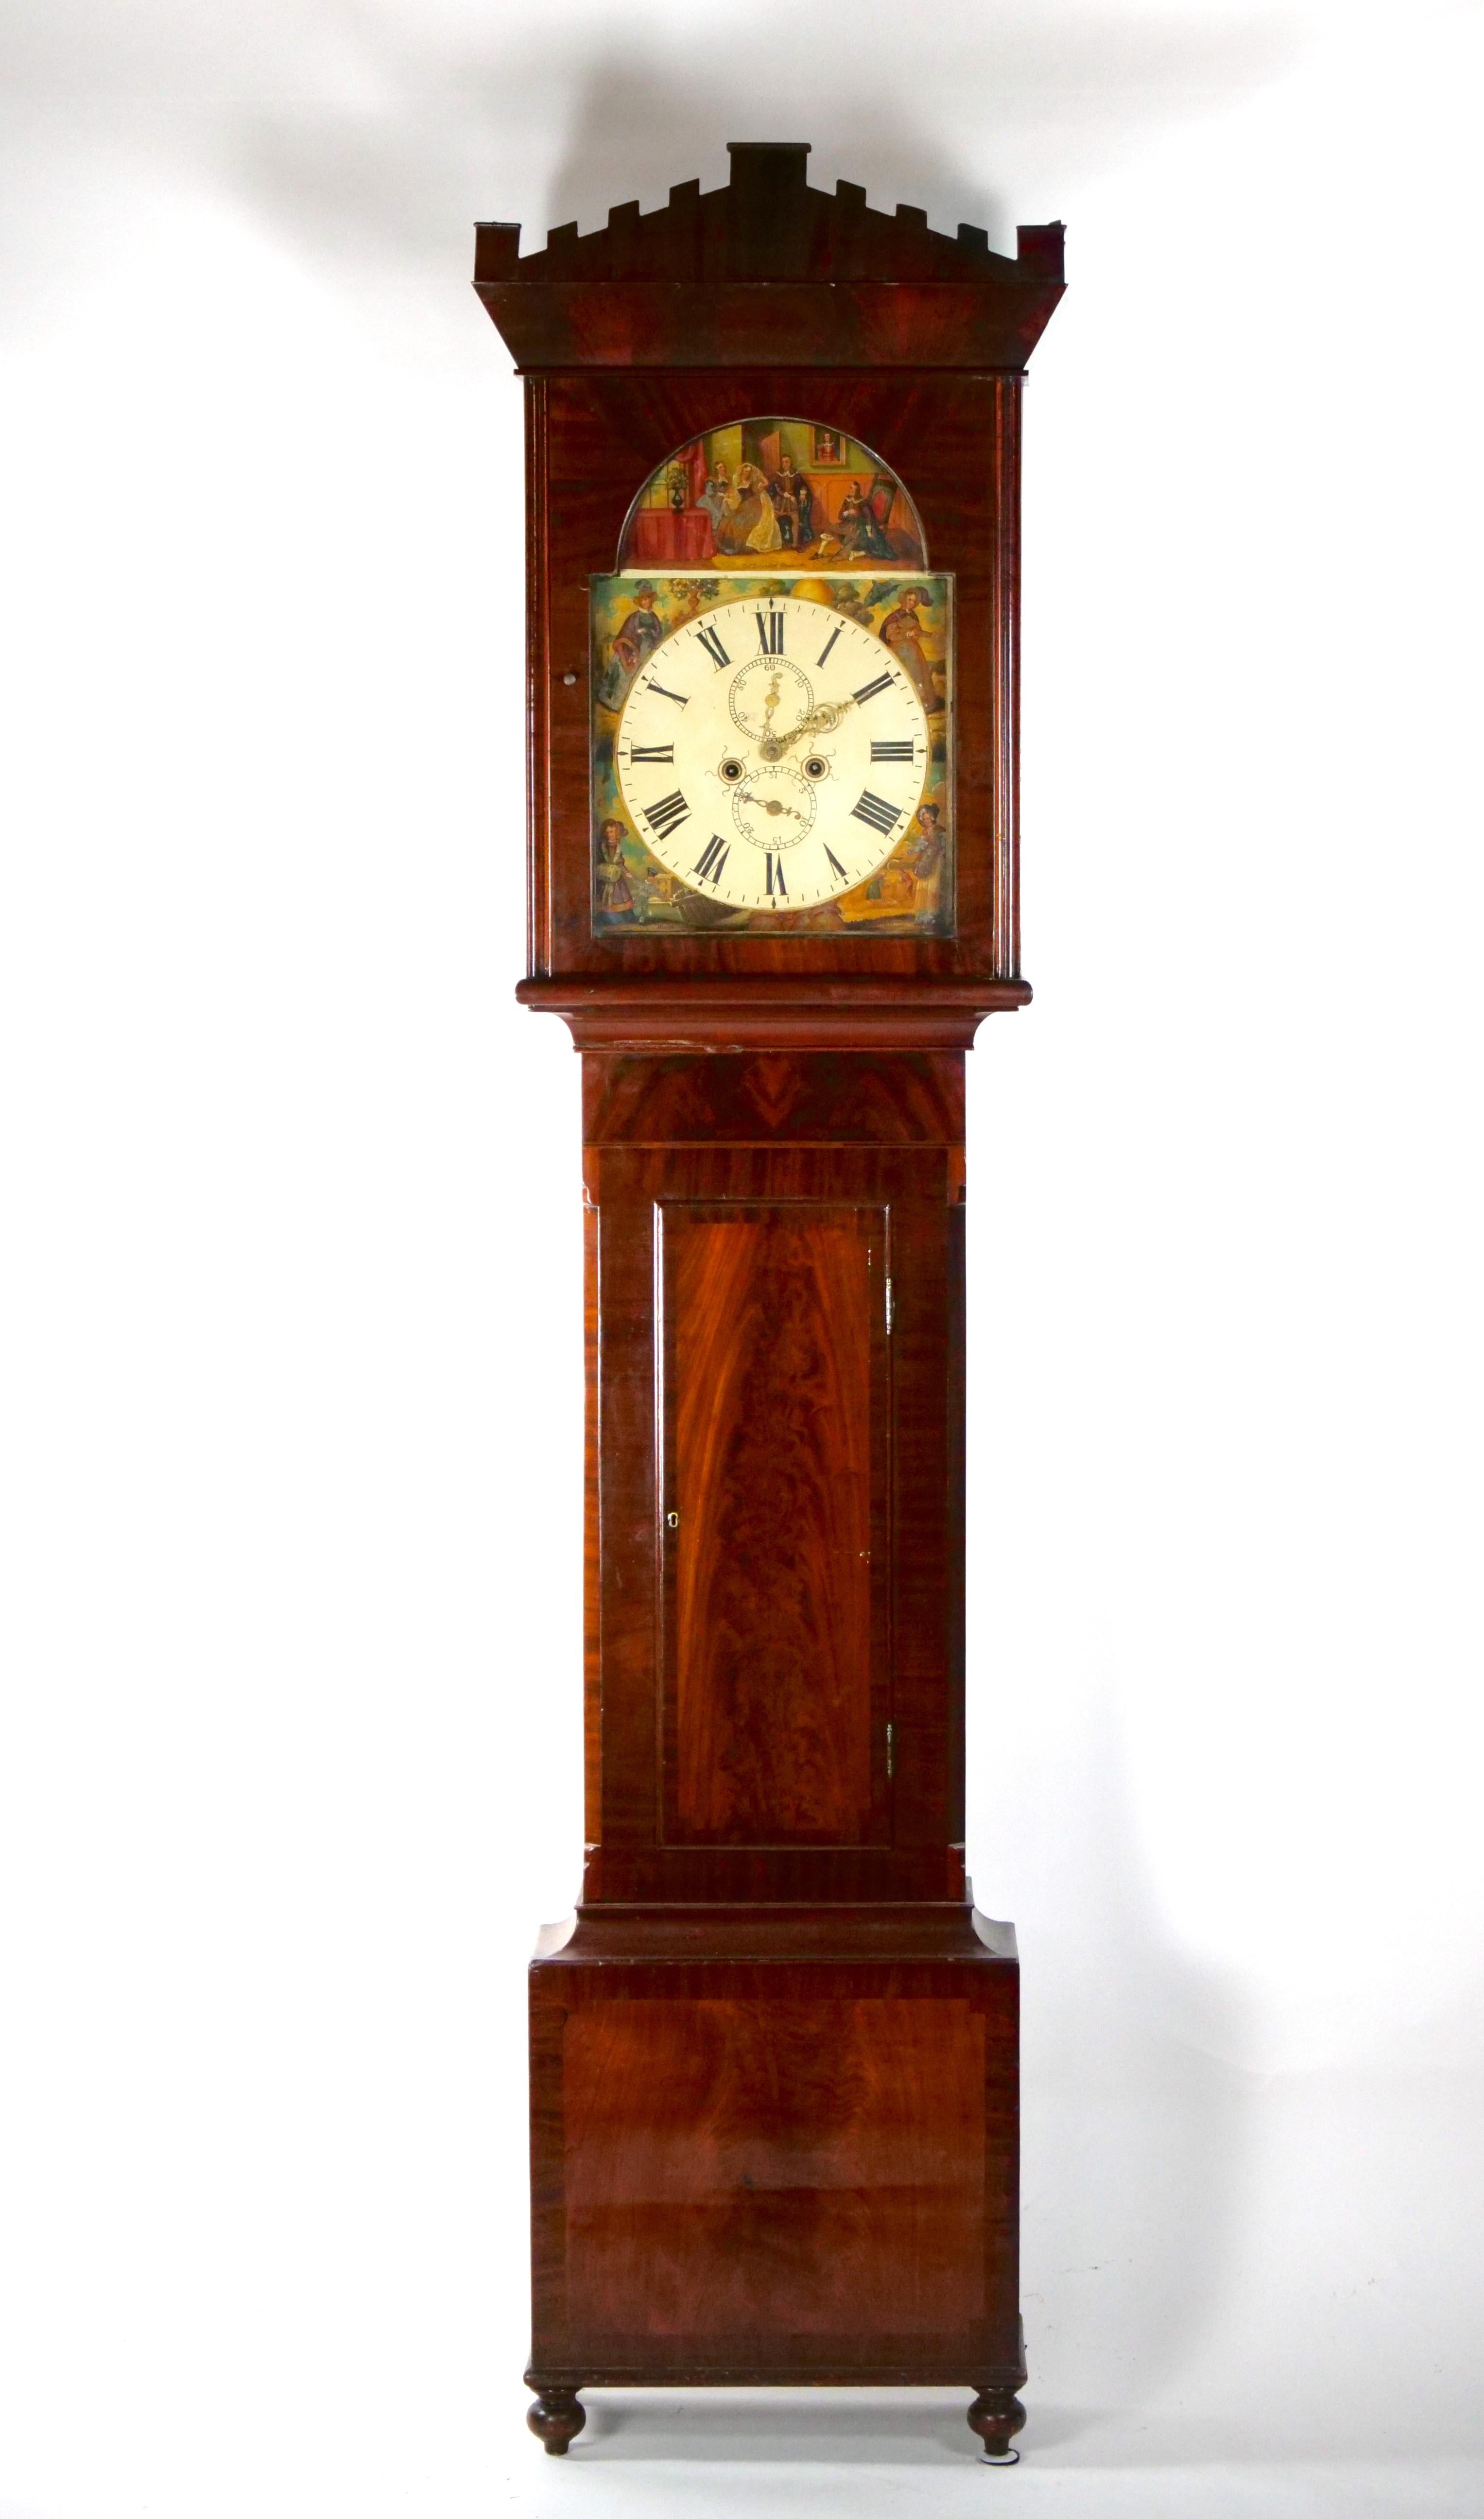 Outstanding craftsmanship and beautifully crafted in mahogany and features numerous details that make this a desirable timepiece. From the hand carved decorated top pediment with its clean line mahogany wood supports to the satinwood inlaid